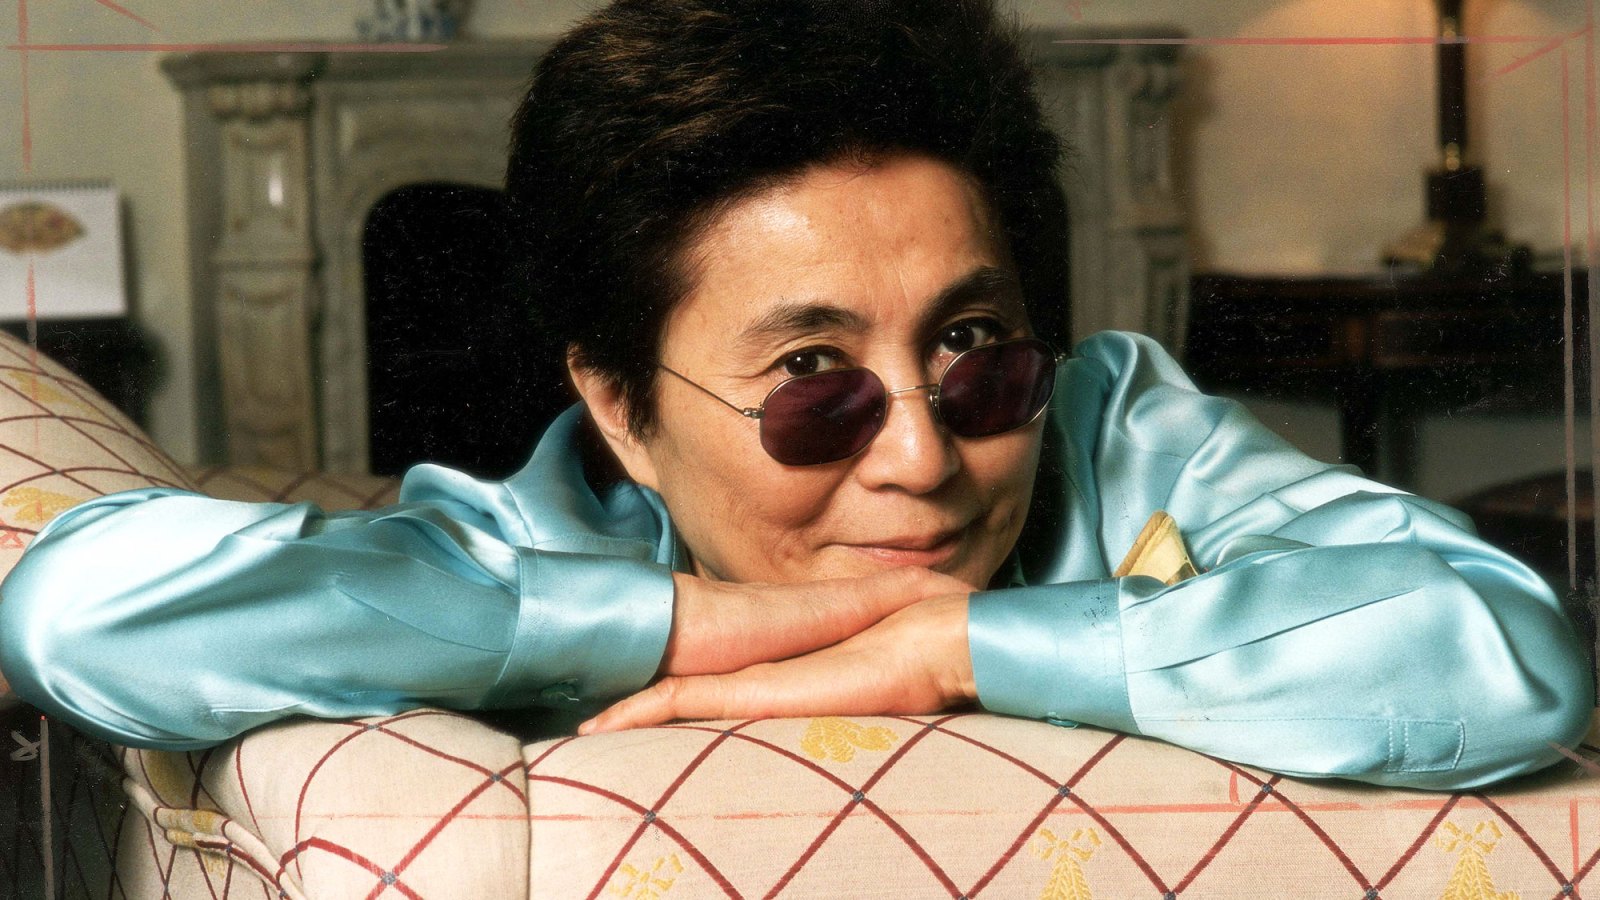 Yoko Ono: 25 Things You Don’t Know About Me (I Prefer Doing the Dougie to Krumping!)